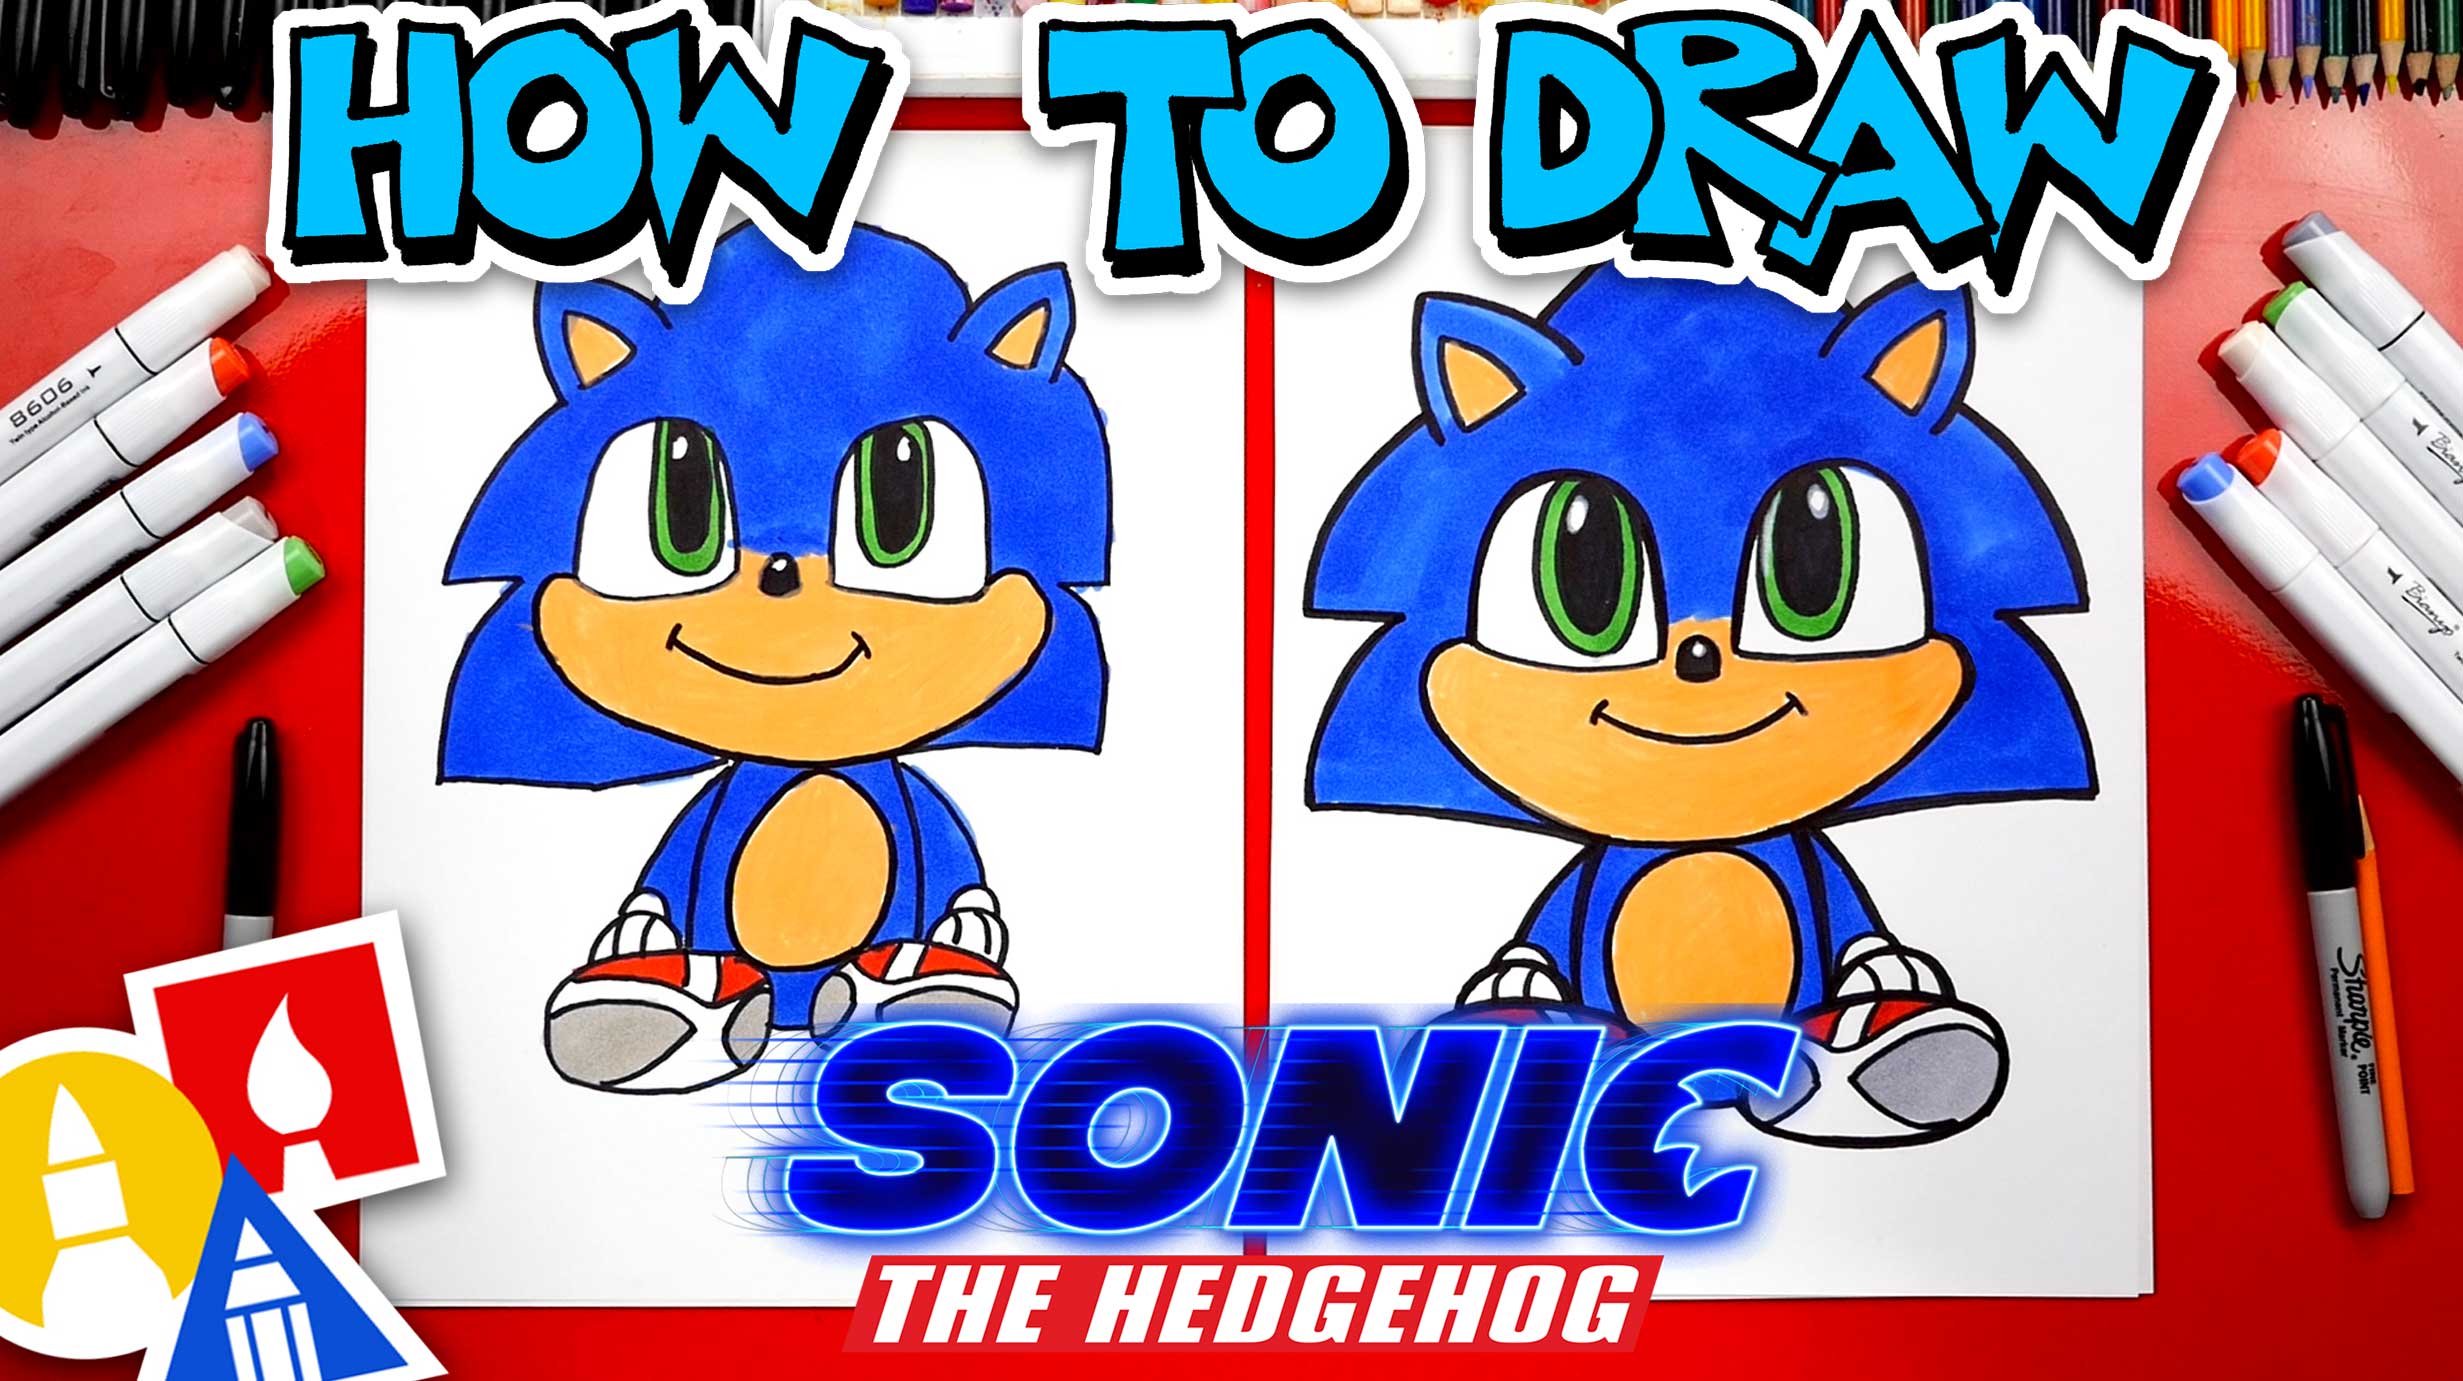 https://artforkidshub.com/wp-content/uploads/2020/04/How-To-Draw-Baby-Sonic-From-Sonic-The-Hedgehog-thumbnail.jpg